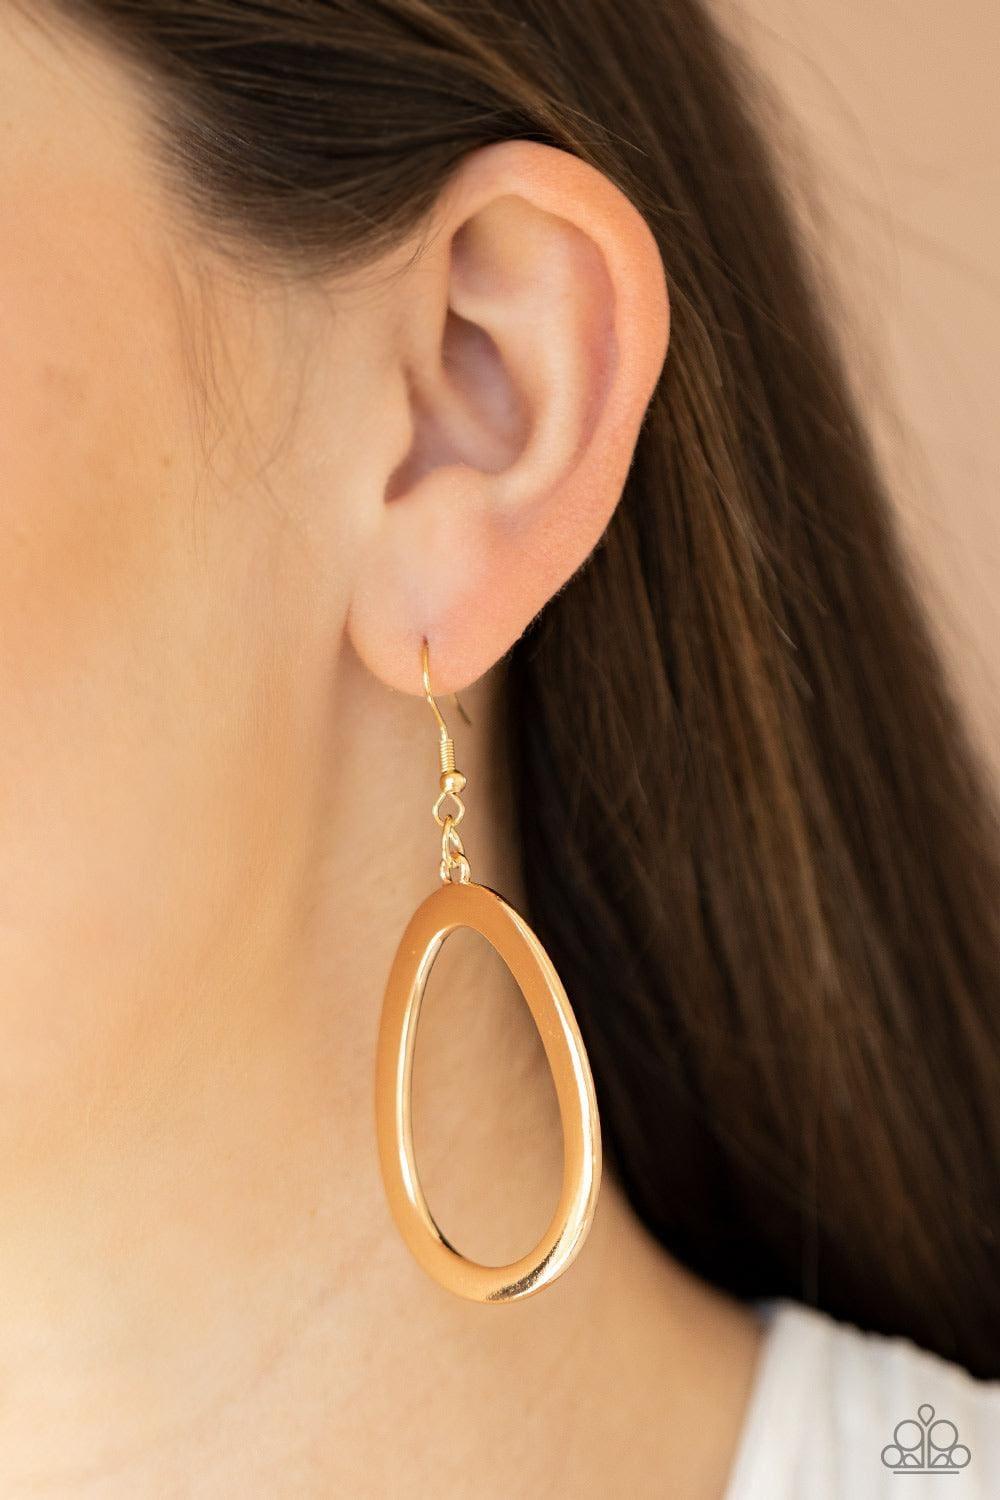 Paparazzi Accessories - Casual Curves - Gold Earrings - Bling by JessieK